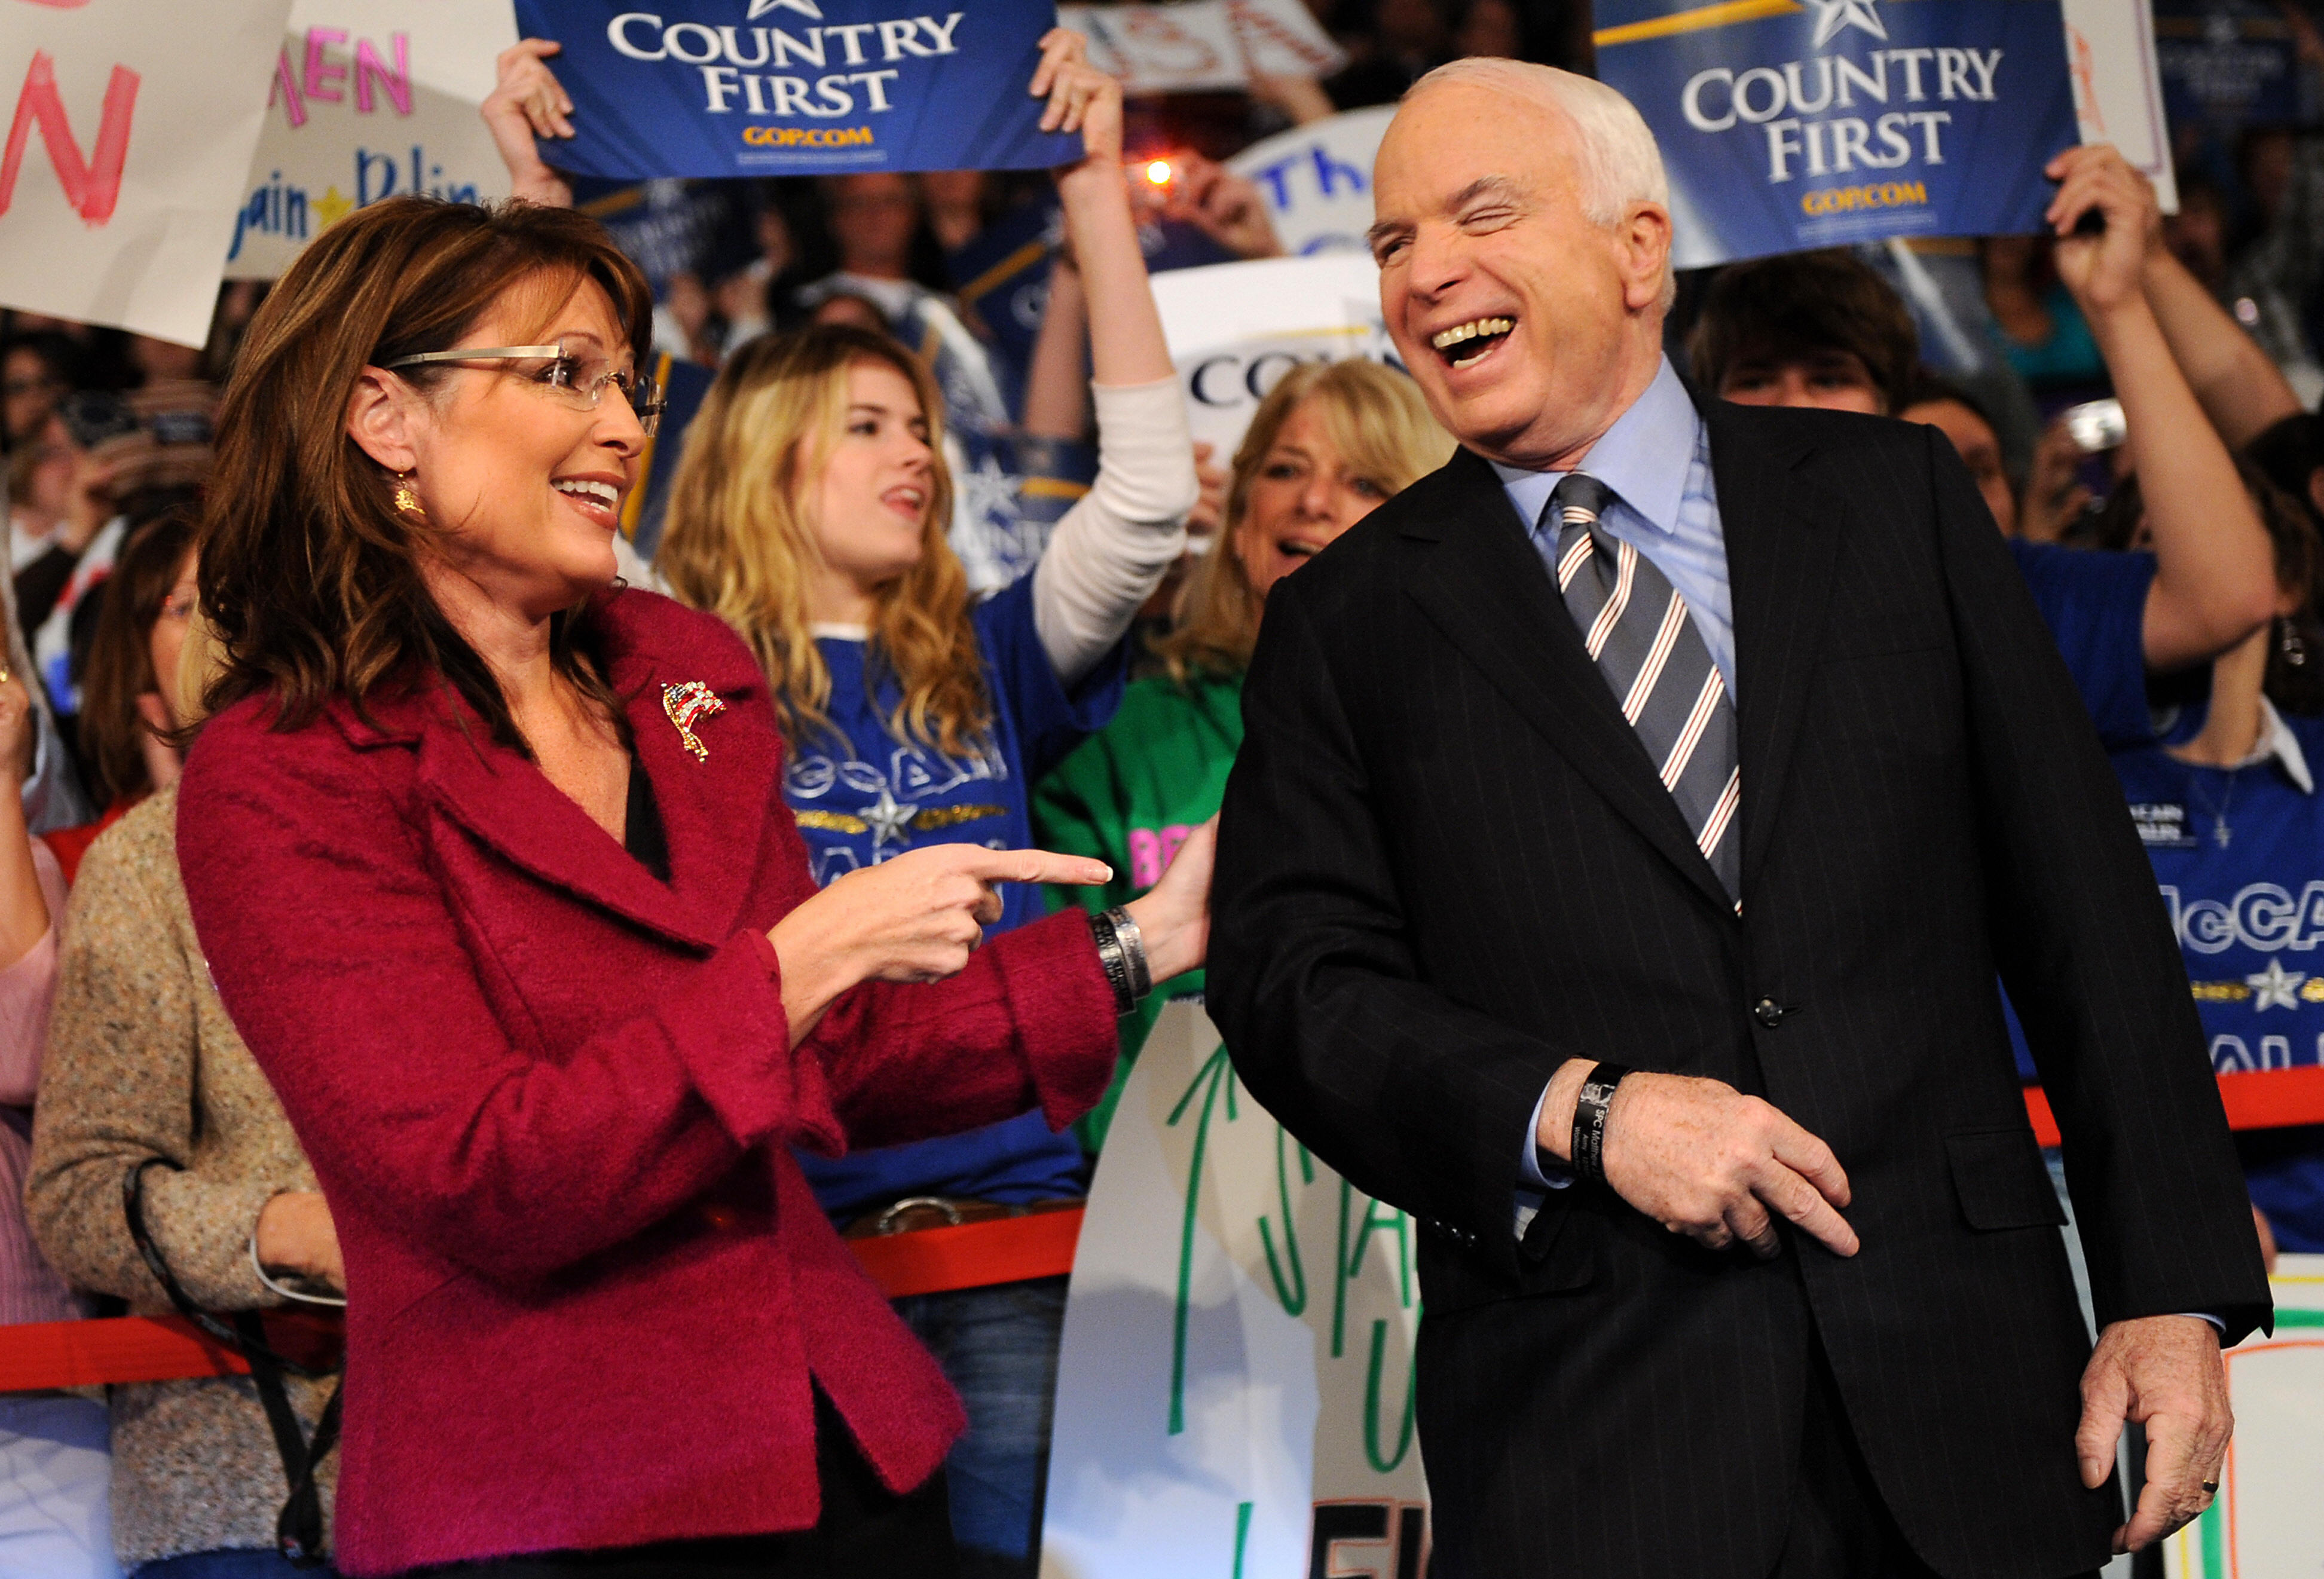 John McCain and his vice presidential candidate Alaska Gov. Sarah Palin laugh during a campaign rally in Pennsylvania in 2008